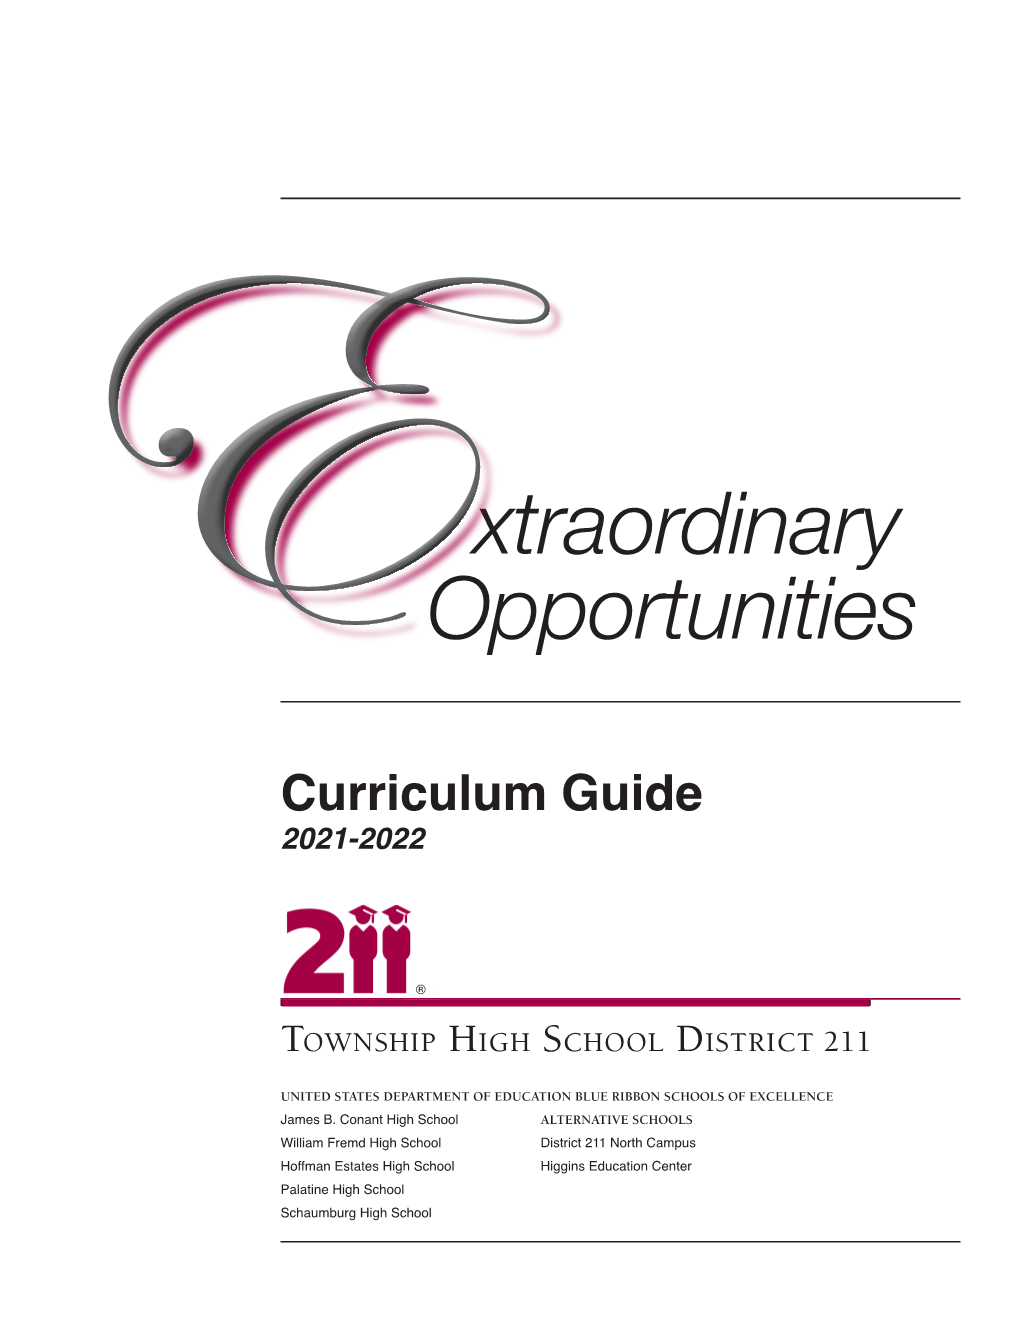 Township High School District 211 Curriculum Guide